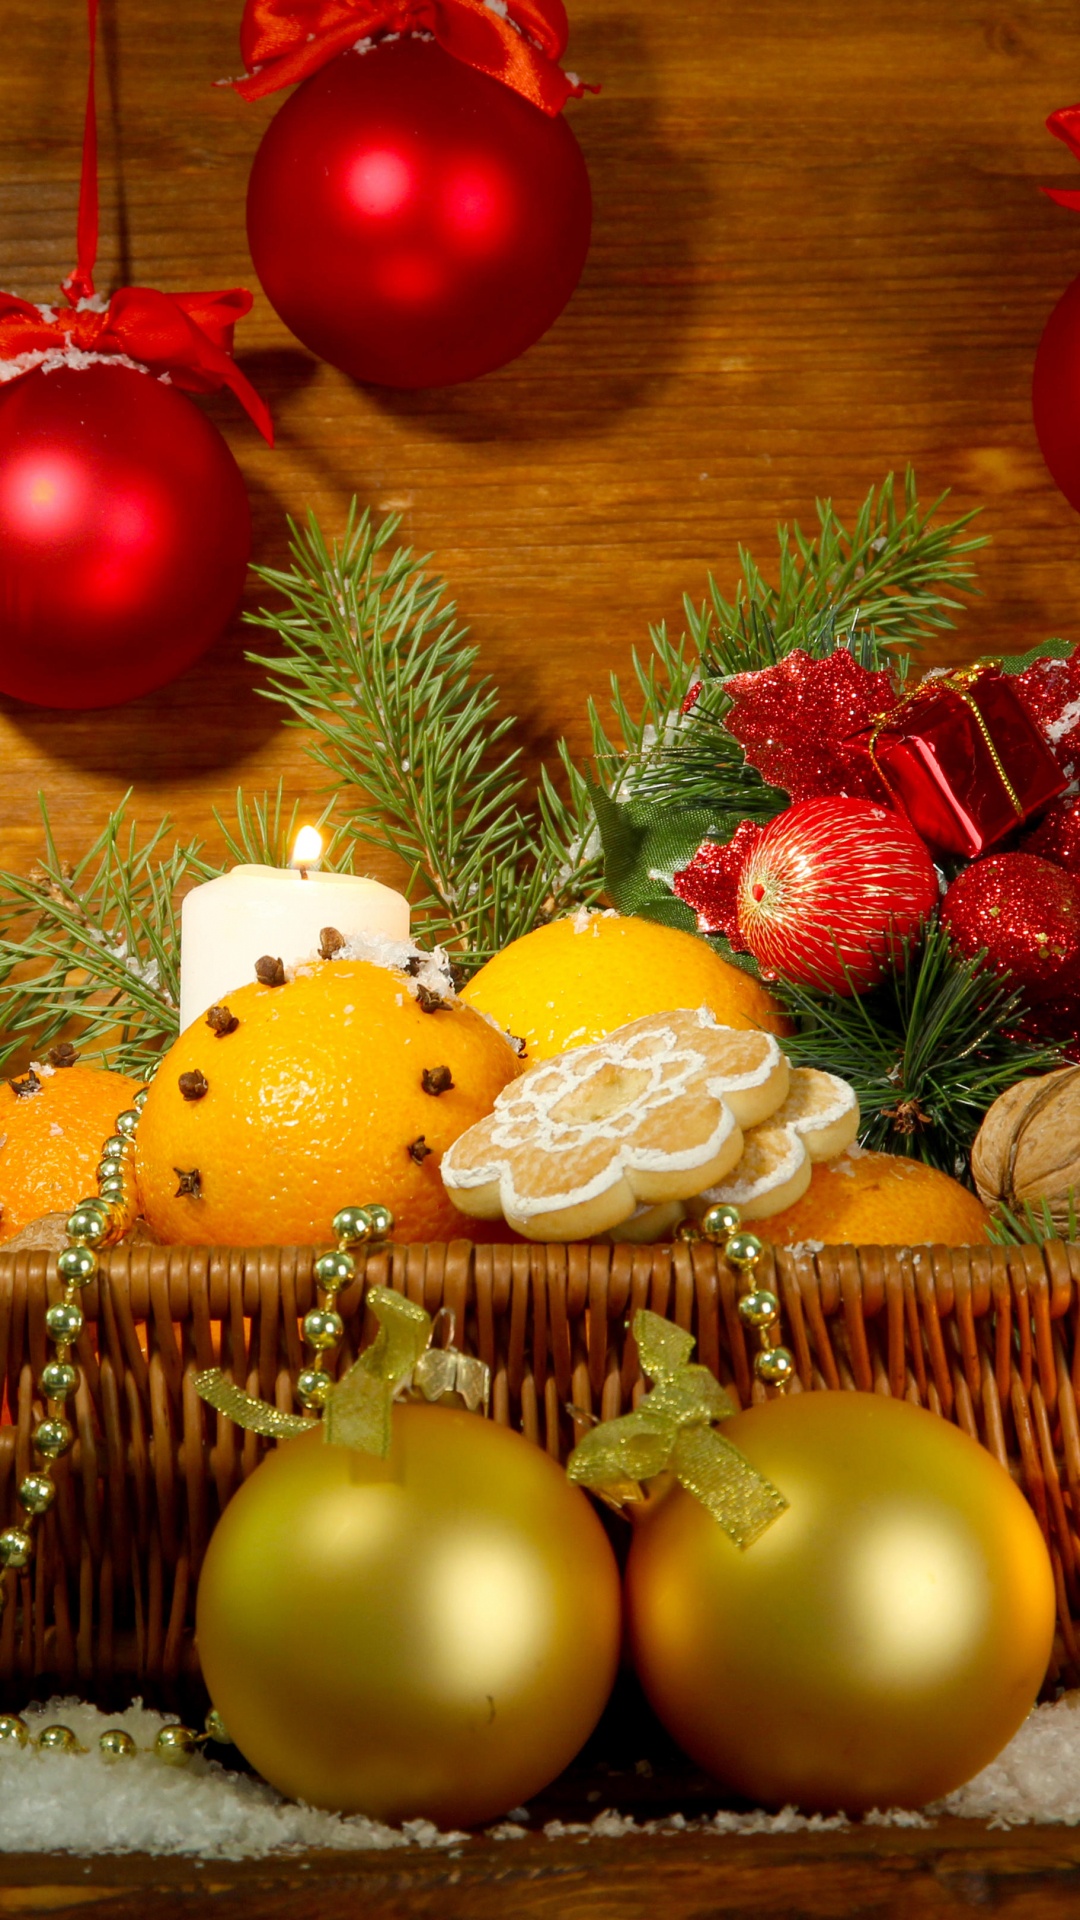 New Year, Christmas Day, Christmas Ornament, Christmas Decoration, Still Life. Wallpaper in 1080x1920 Resolution